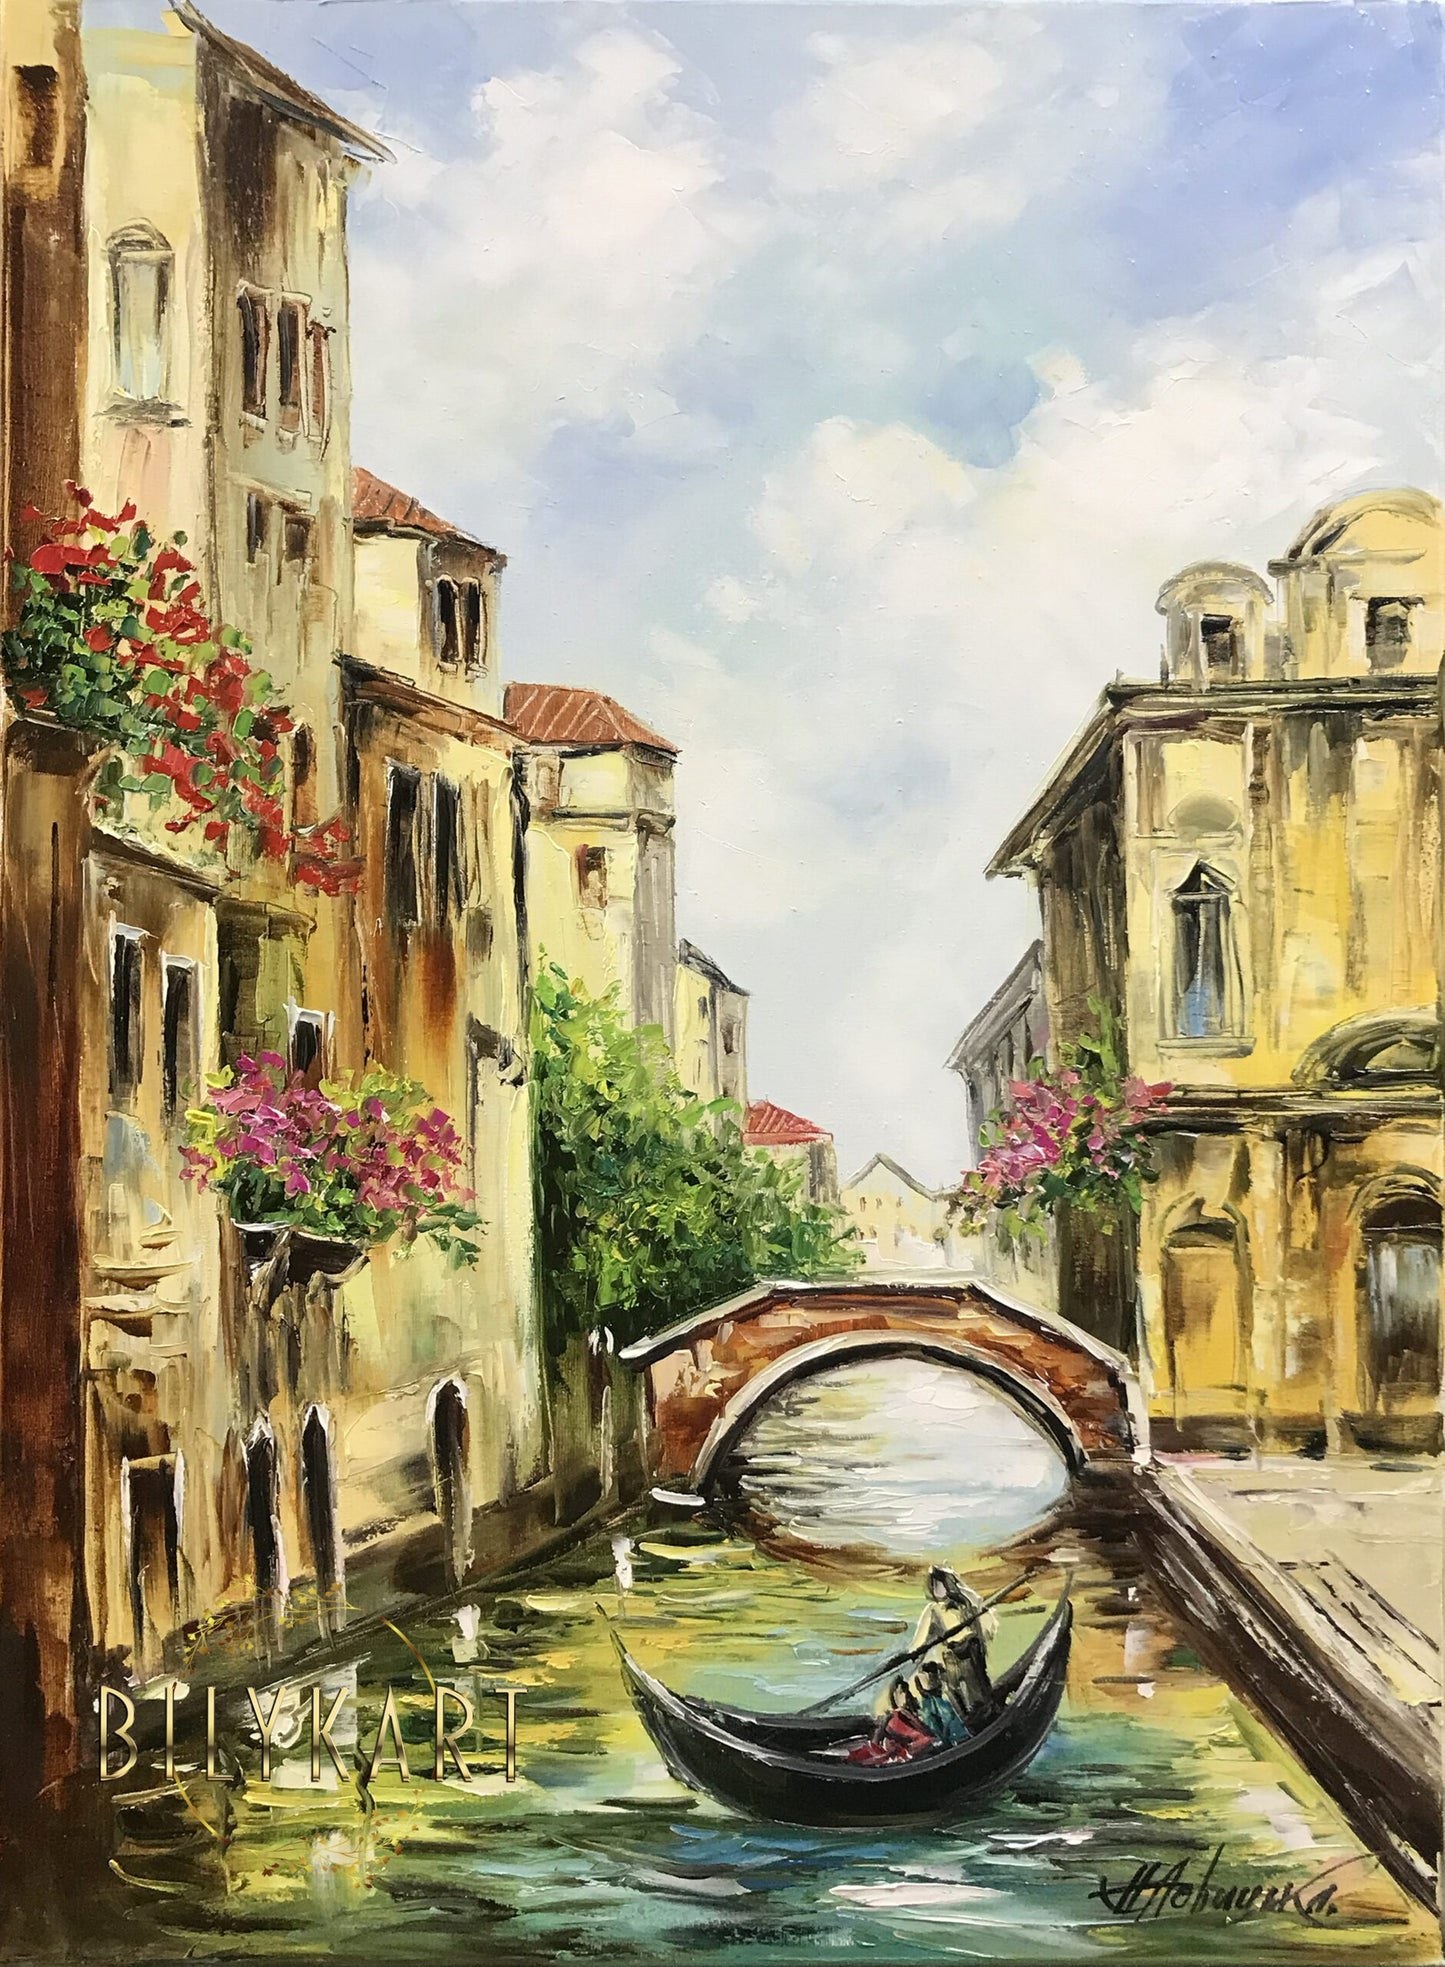 Large Venetian Oil Painting Original Venice Italy Wall Art Italy Cityscape Paintings on Canvas Oversized Venice Canal Art